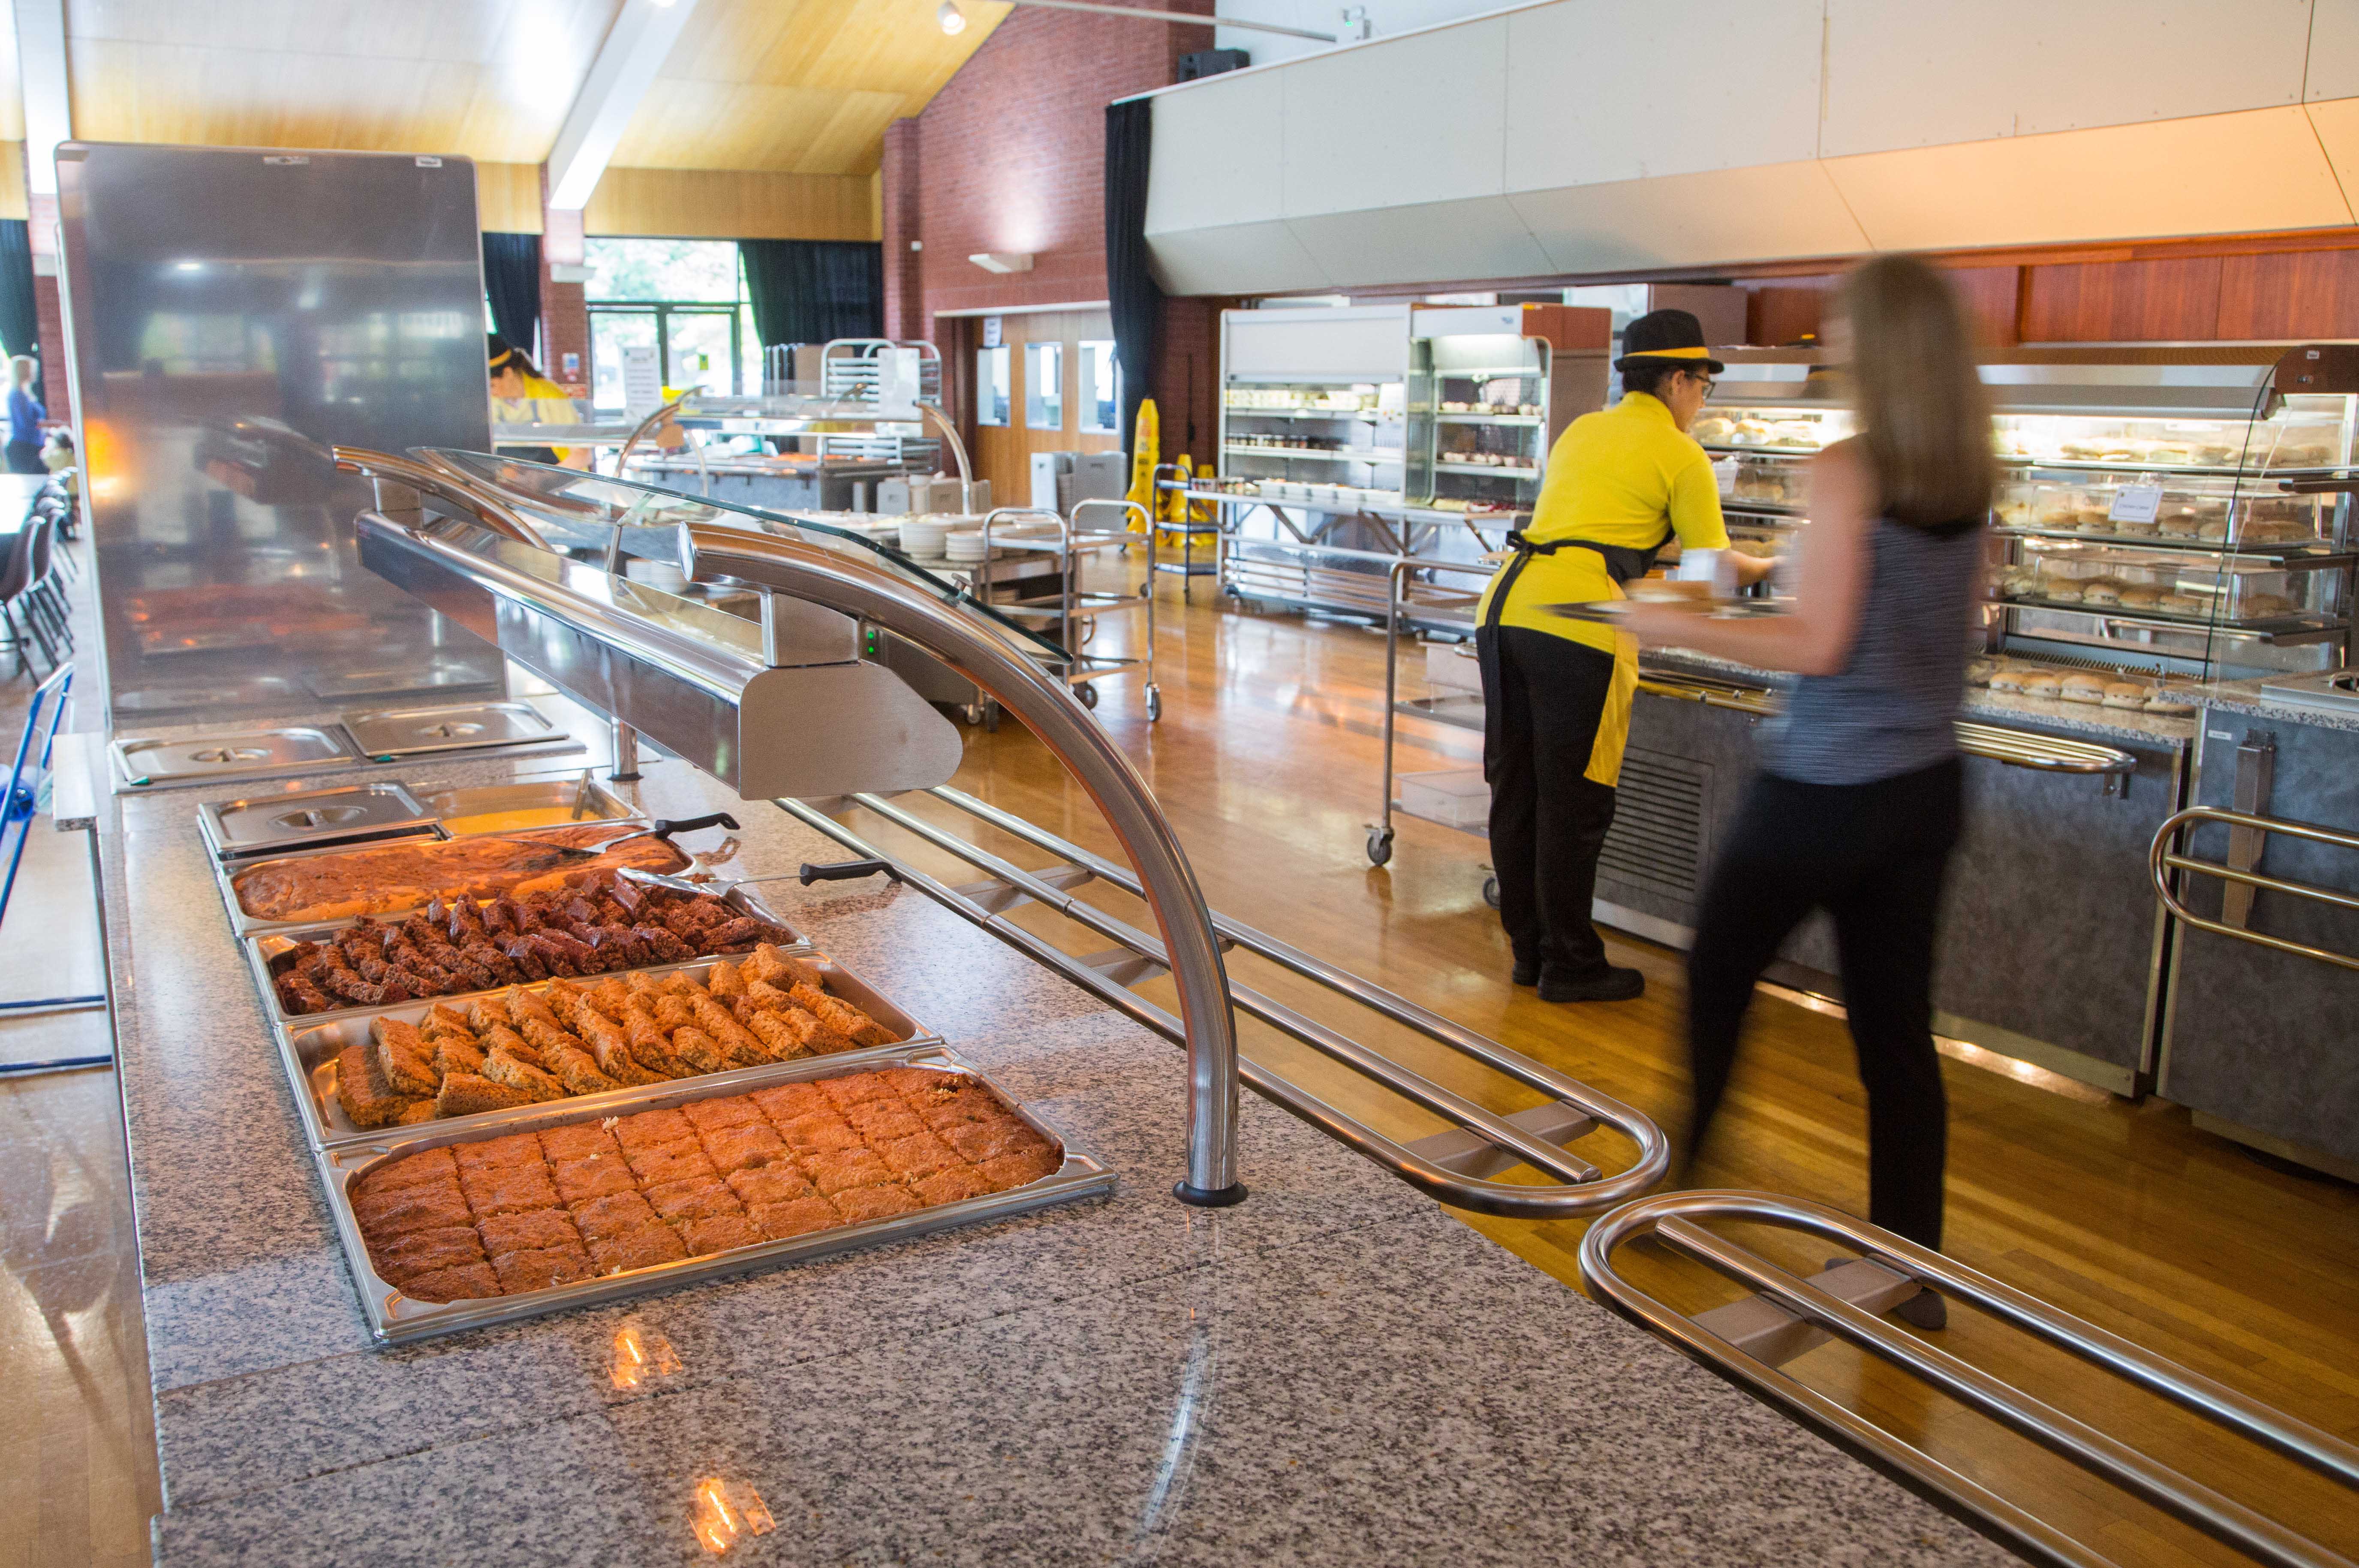 Bespoke new set-up brings flexibility to Stockport Grammar’s dining service